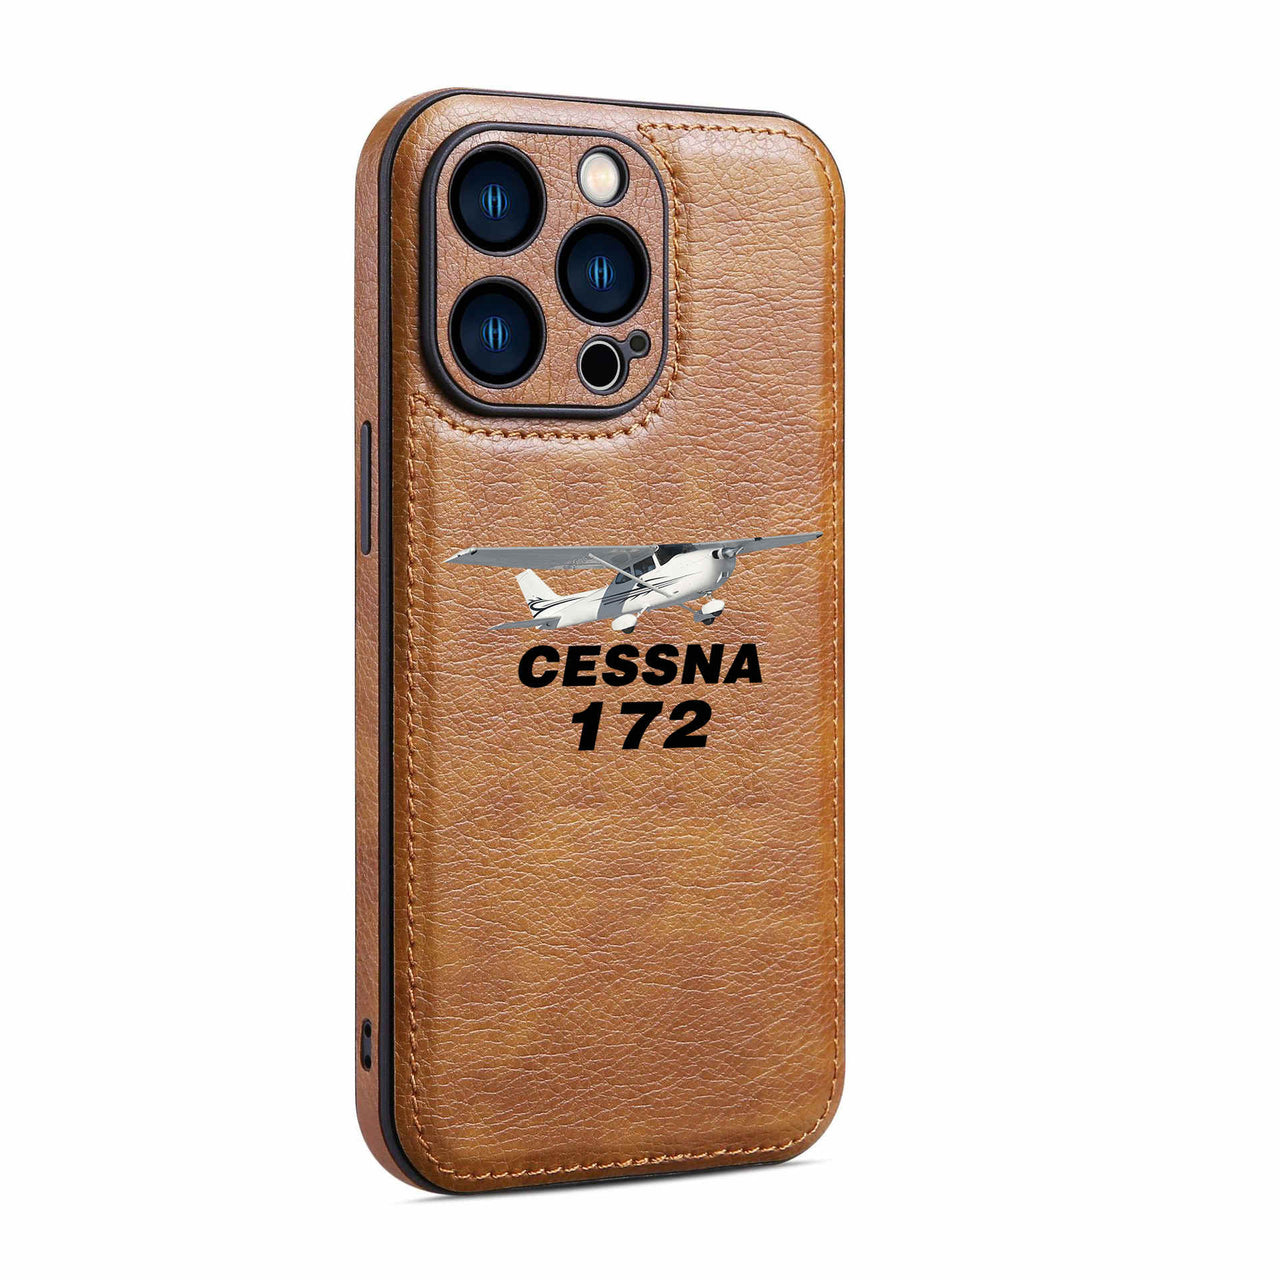 The Cessna 172 Designed Leather iPhone Cases